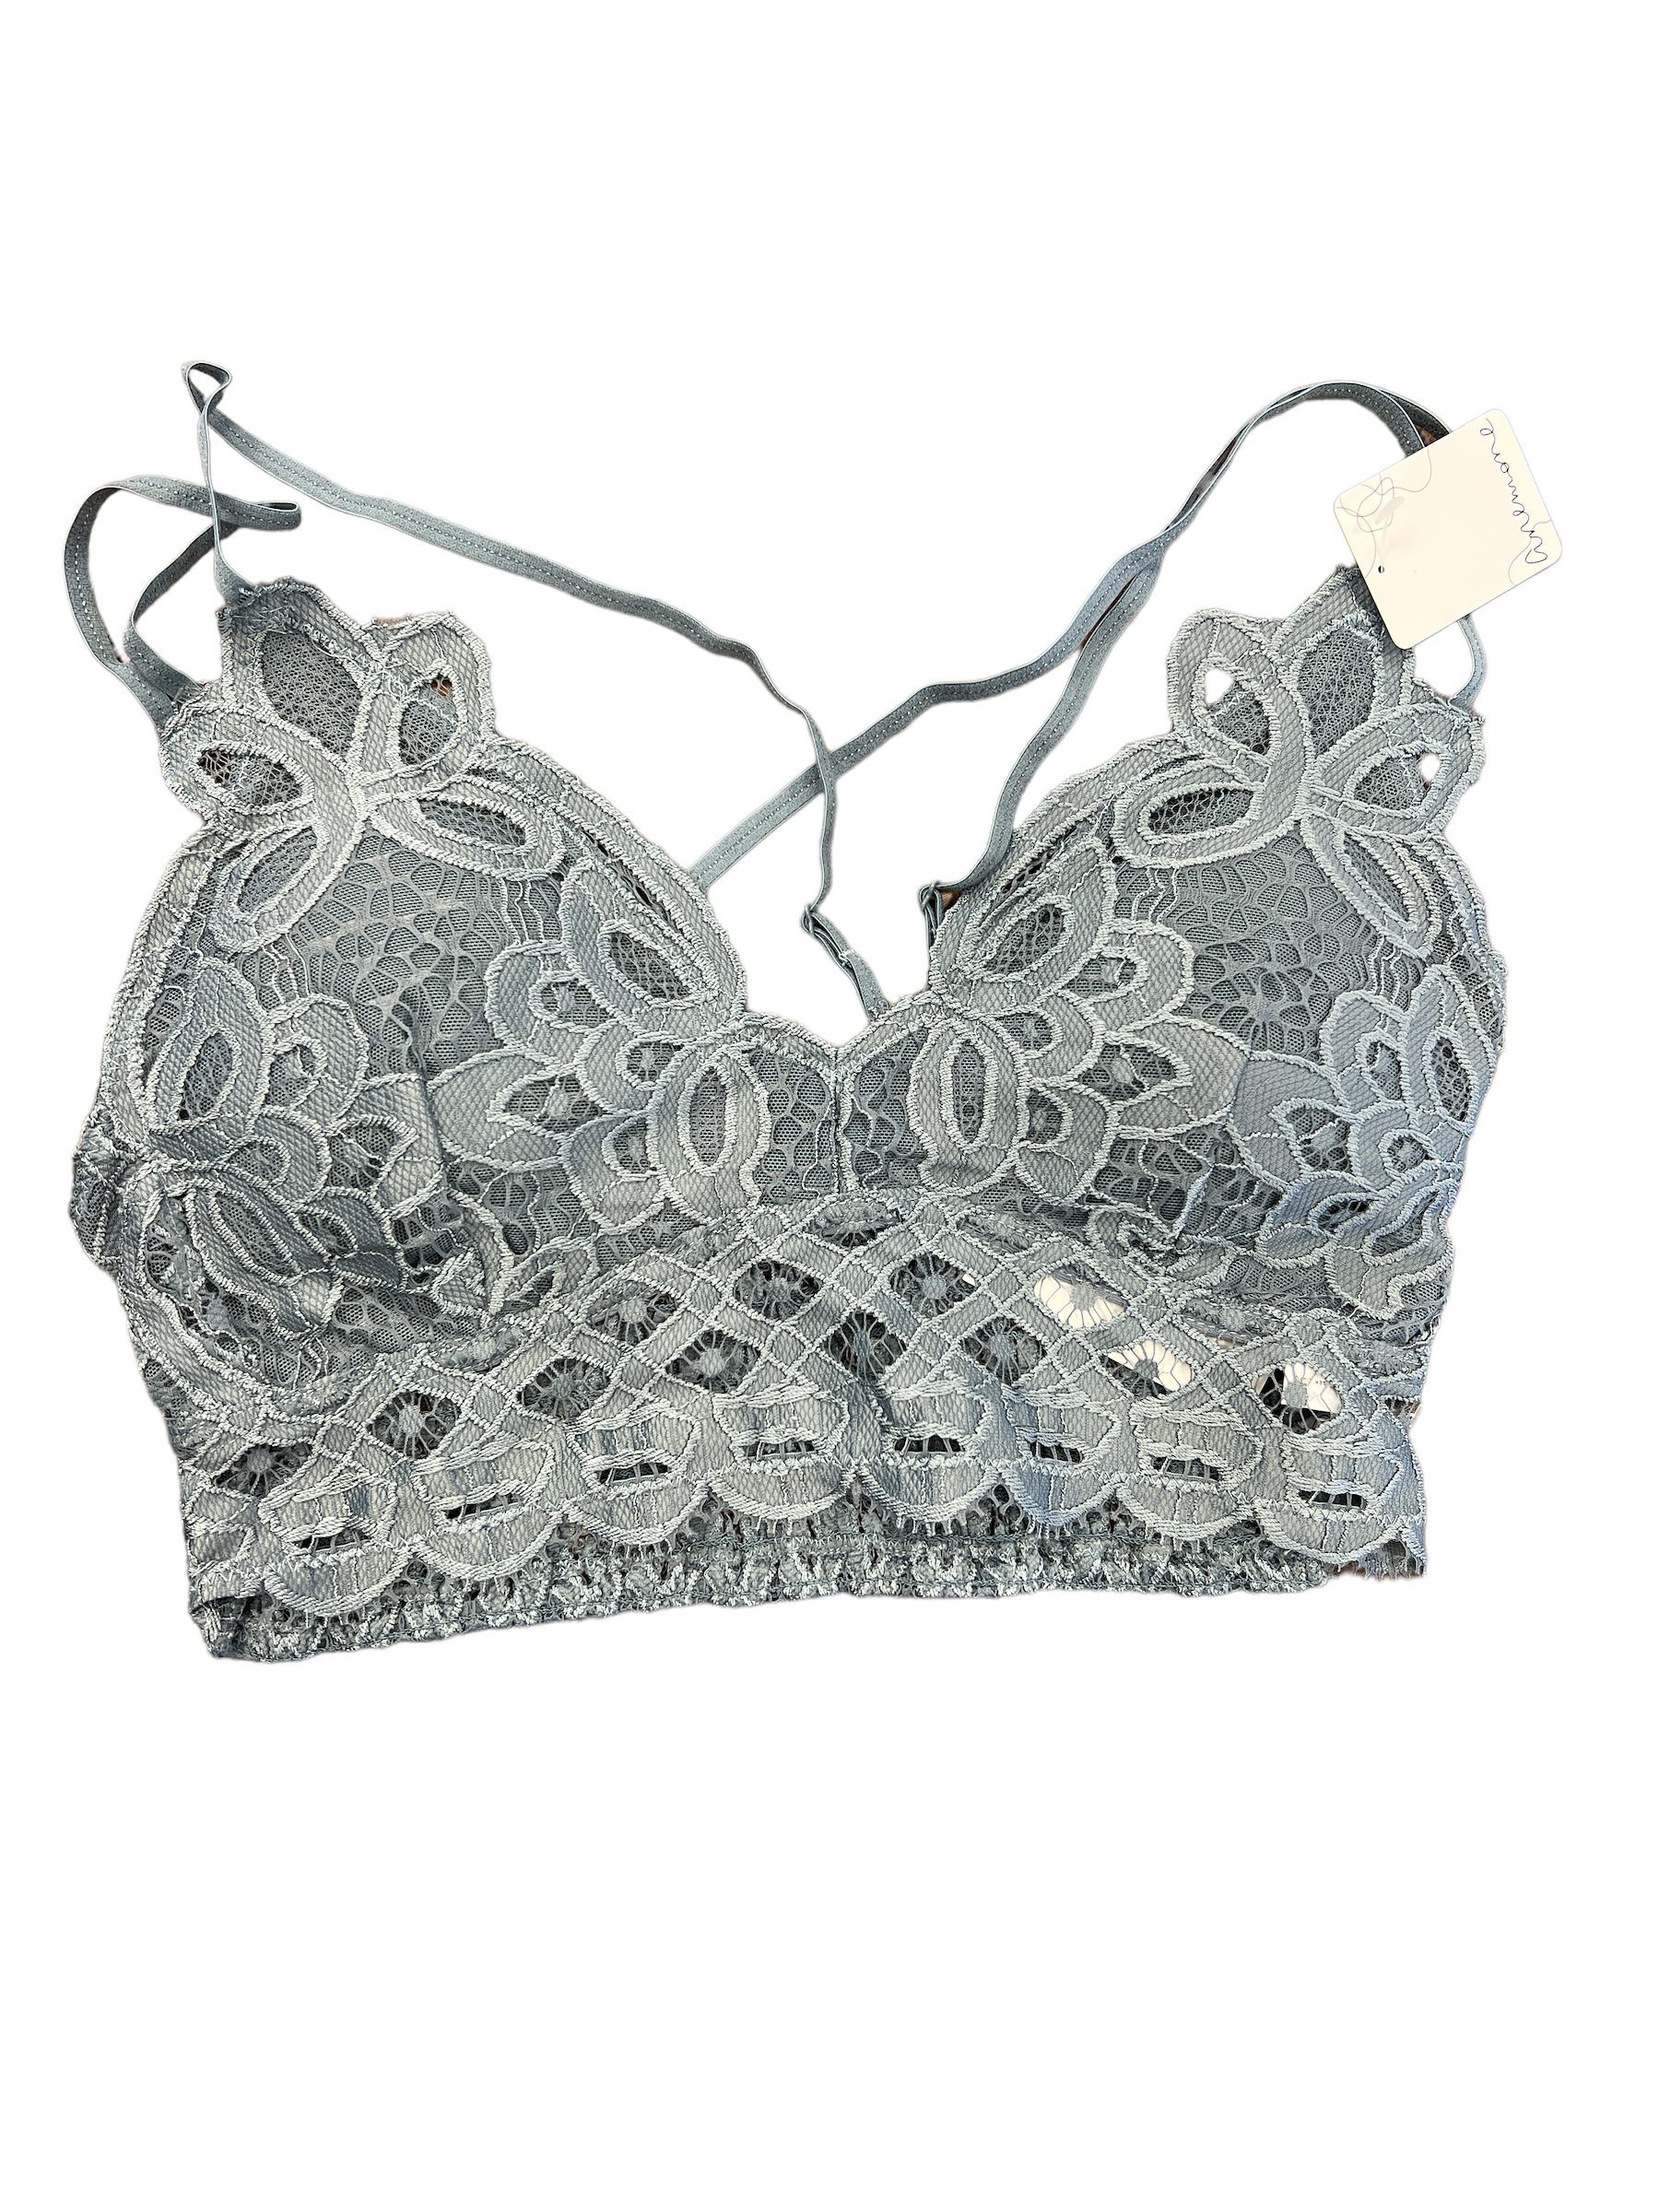 Scalloped Lace Cami Bralette-330 Intimates, Loungewear & PJs-Simply Stylish Boutique-Simply Stylish Boutique | Women’s & Kid’s Fashion | Paducah, KY